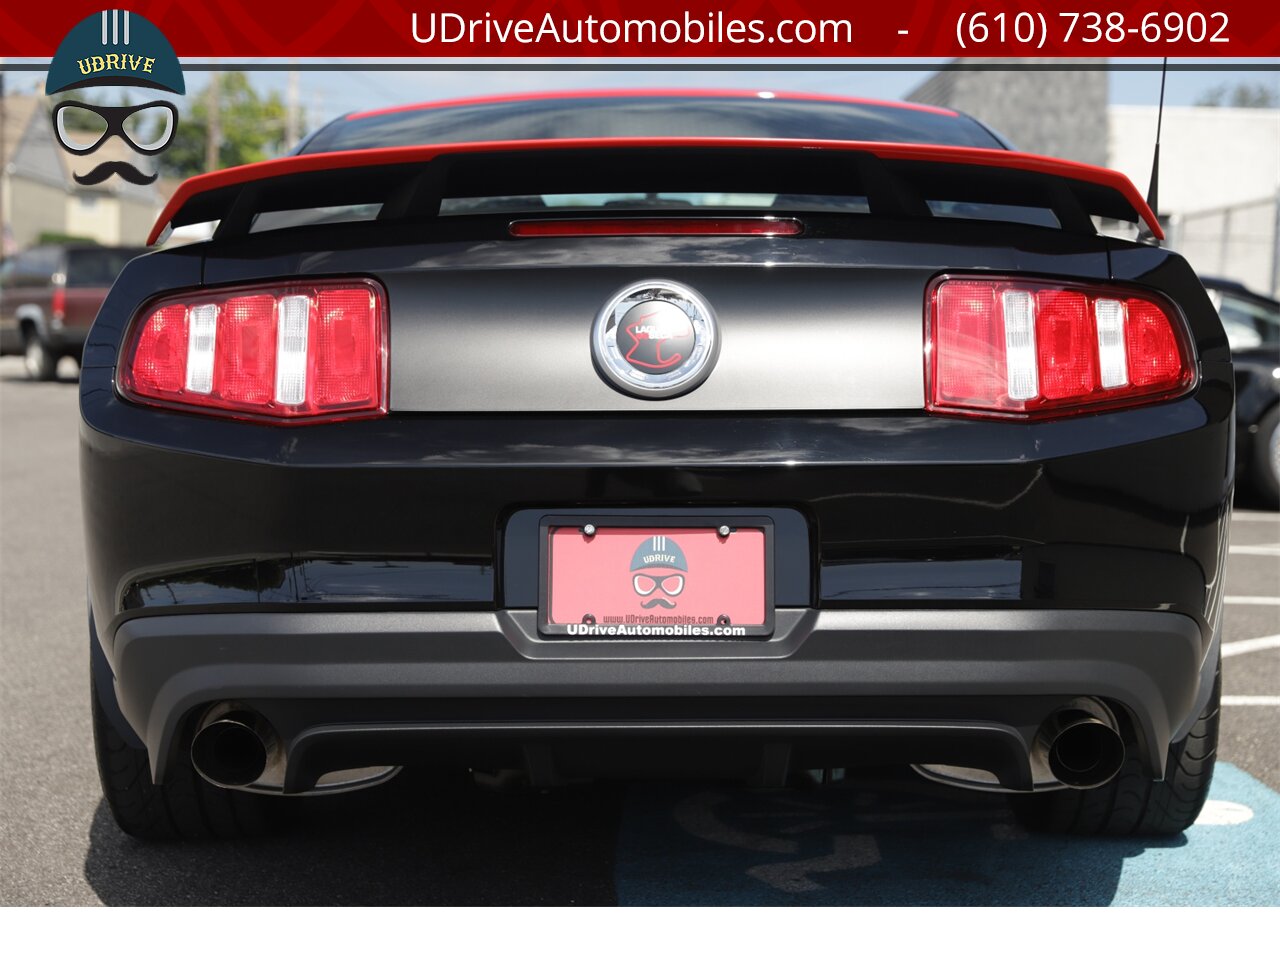 2012 Ford Mustang 866 Miles Boss 302 Laguna Seca #338 of 750  Red TracKey Activated - Photo 20 - West Chester, PA 19382